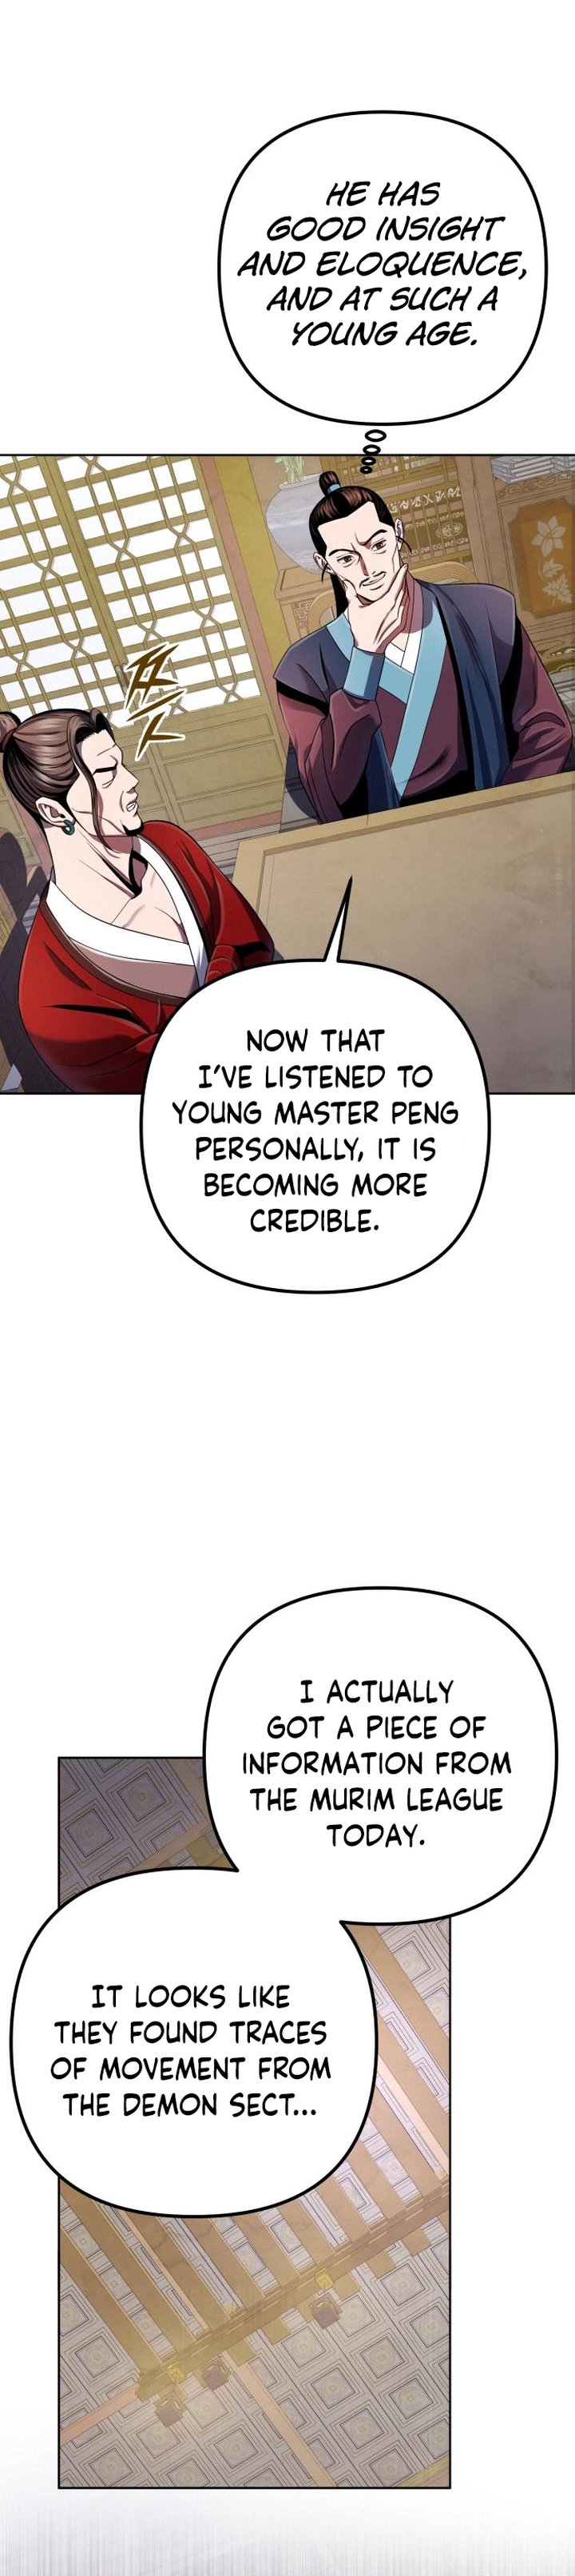 Revenge Of Young Master Peng 35 22